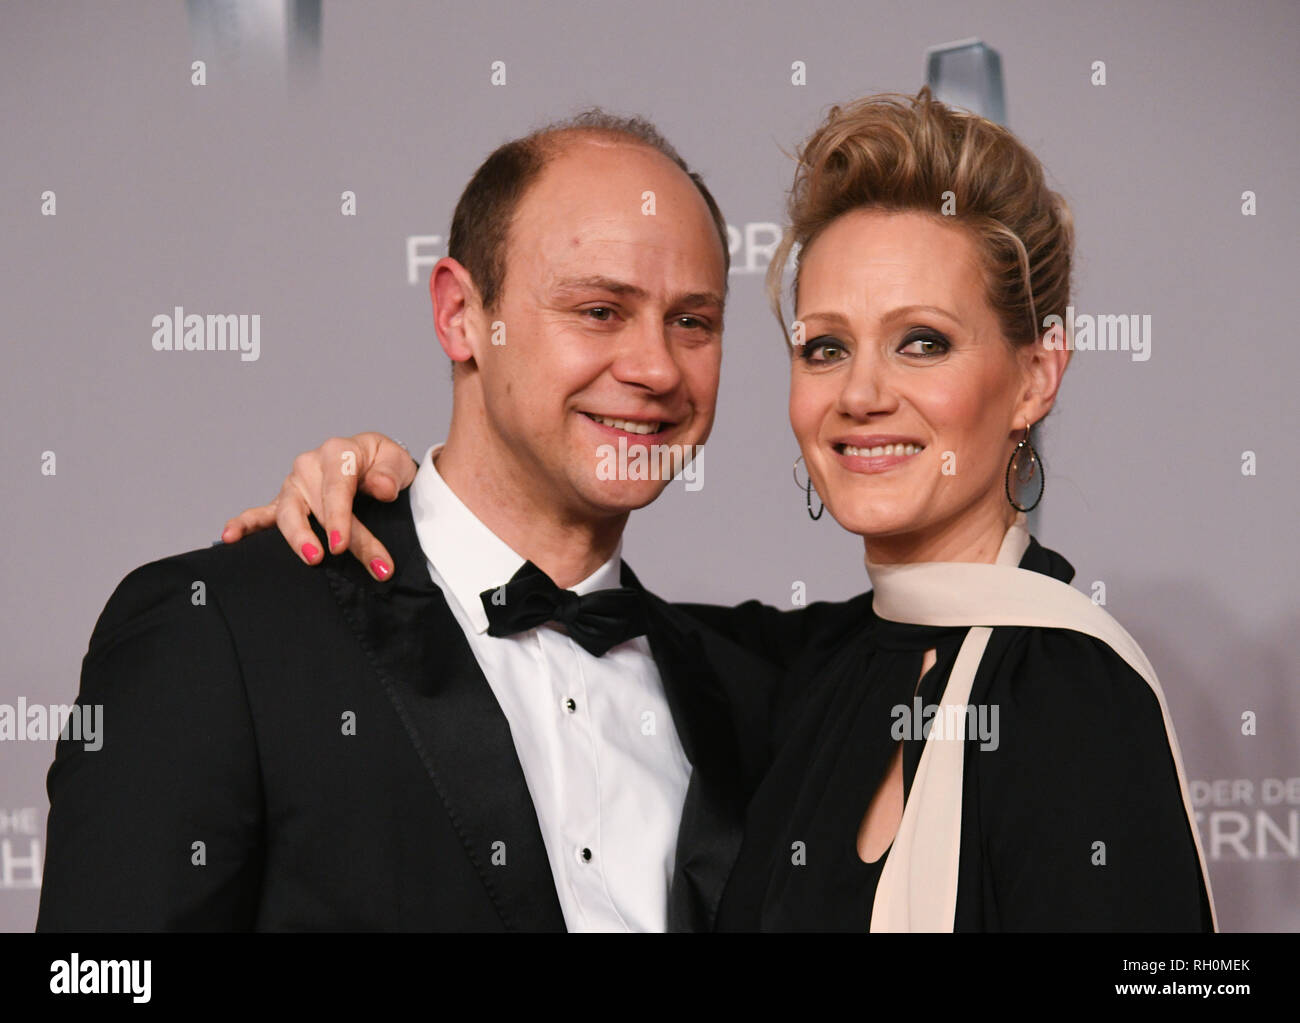 31 January 2019, North Rhine-Westphalia, Düsseldorf: Actress Anna Schudt and her husband Moritz Führmann are awarded the German Television Prize 2019, the 20th German Television Prize sponsored by ARD, RTL, SAT.1 and ZDF. Photo: Henning Kaiser/dpa Stock Photo